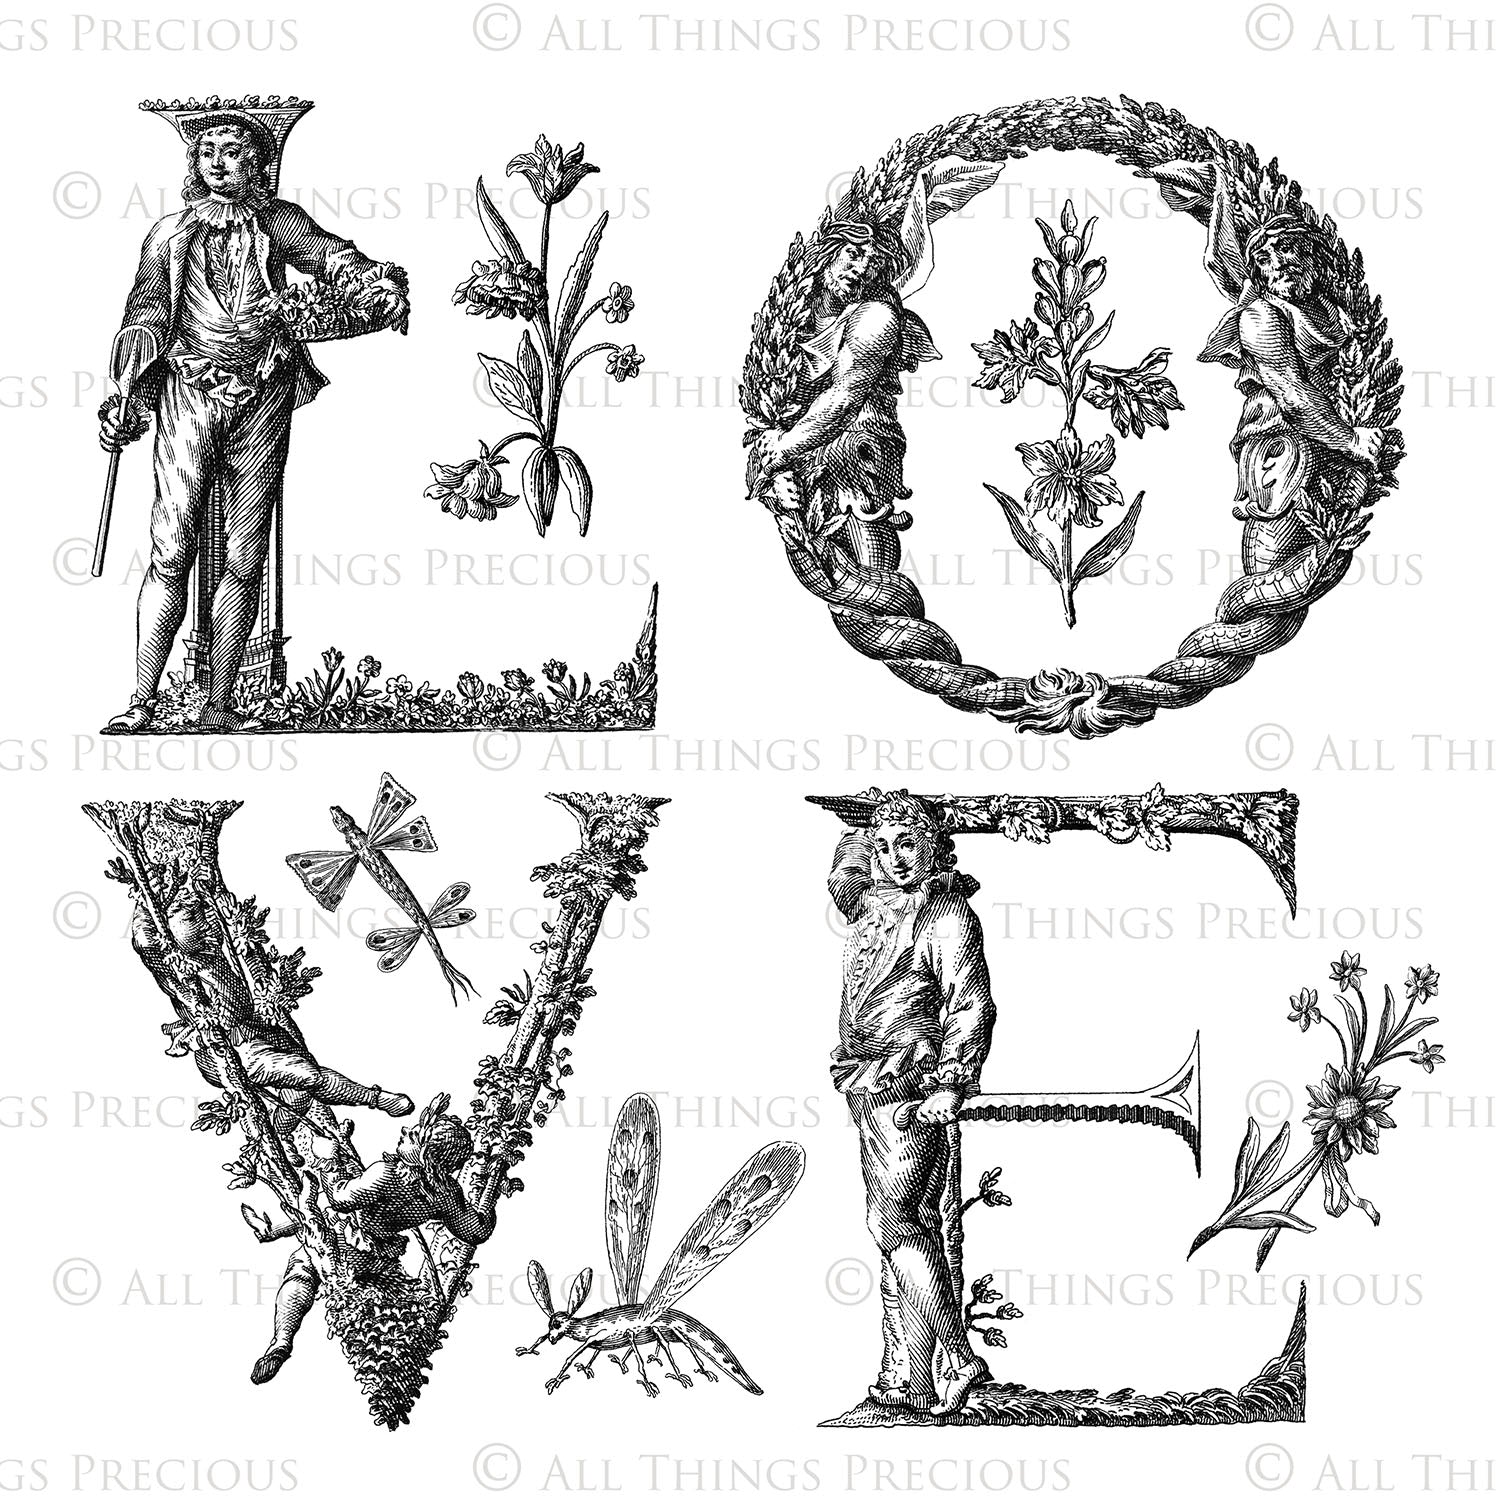 Photoshop brushes for photography and digital design.  Alphabet letters from medieval images. Flowers and bugs. High resolution digital files.  ATP Textures 